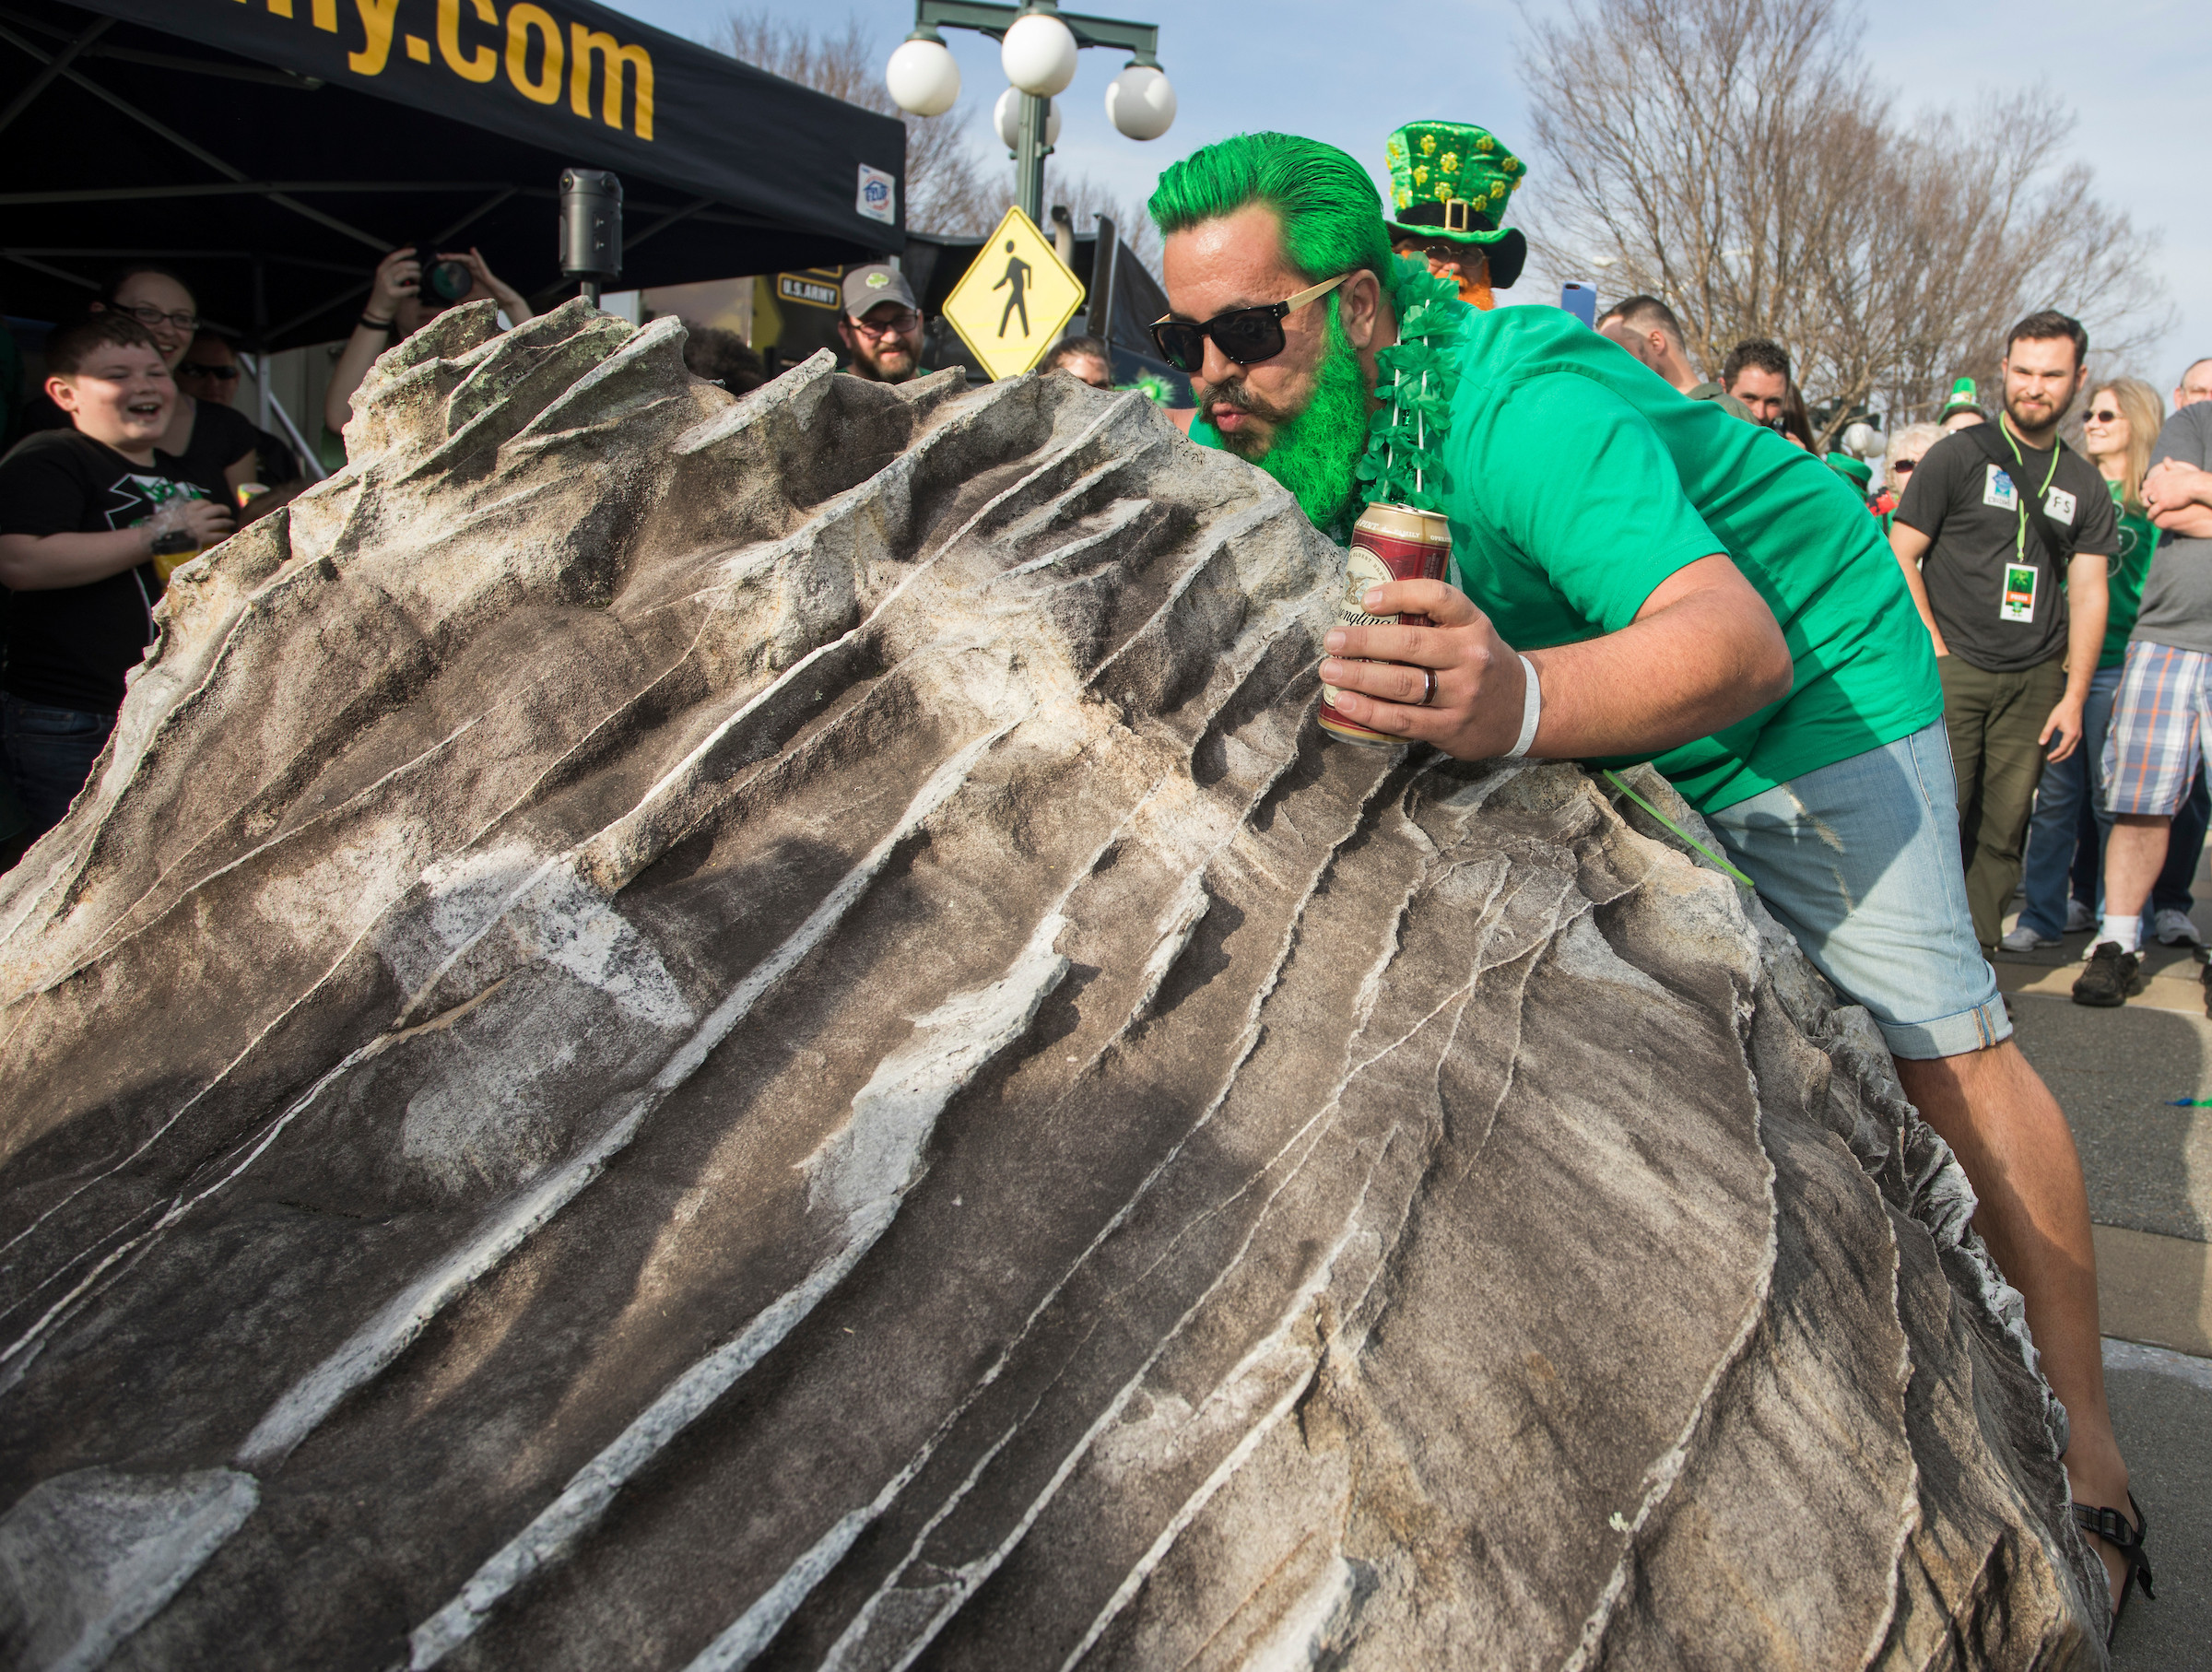 The Blarney Stone Kissing Contest